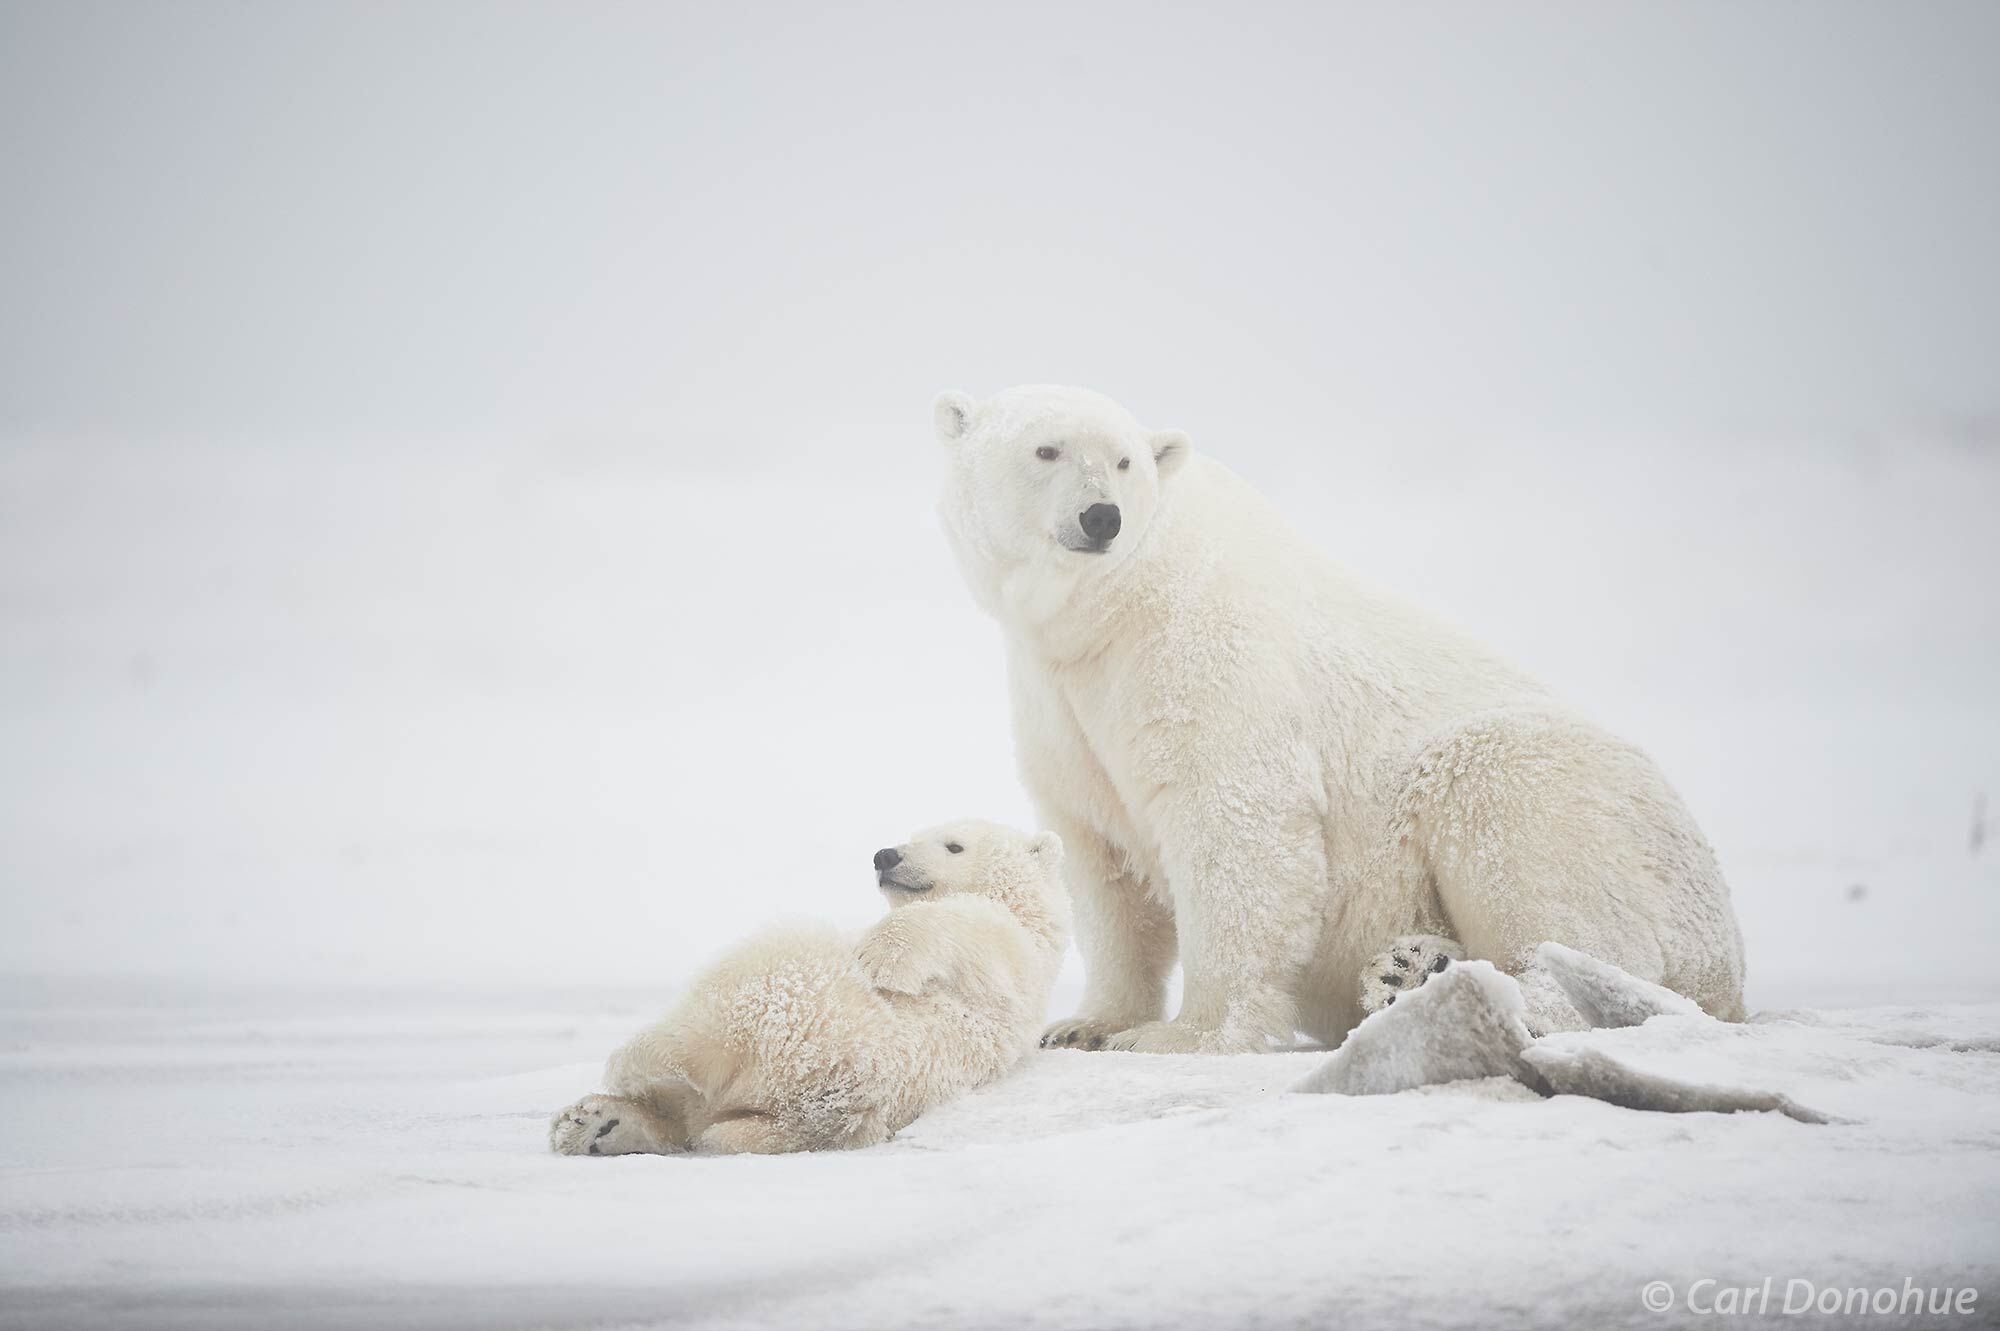 A polar bear mother and her young cub sit on the ice and snow covering the now freezing Beaufort Sea in the Arctic Ocean. Polar...